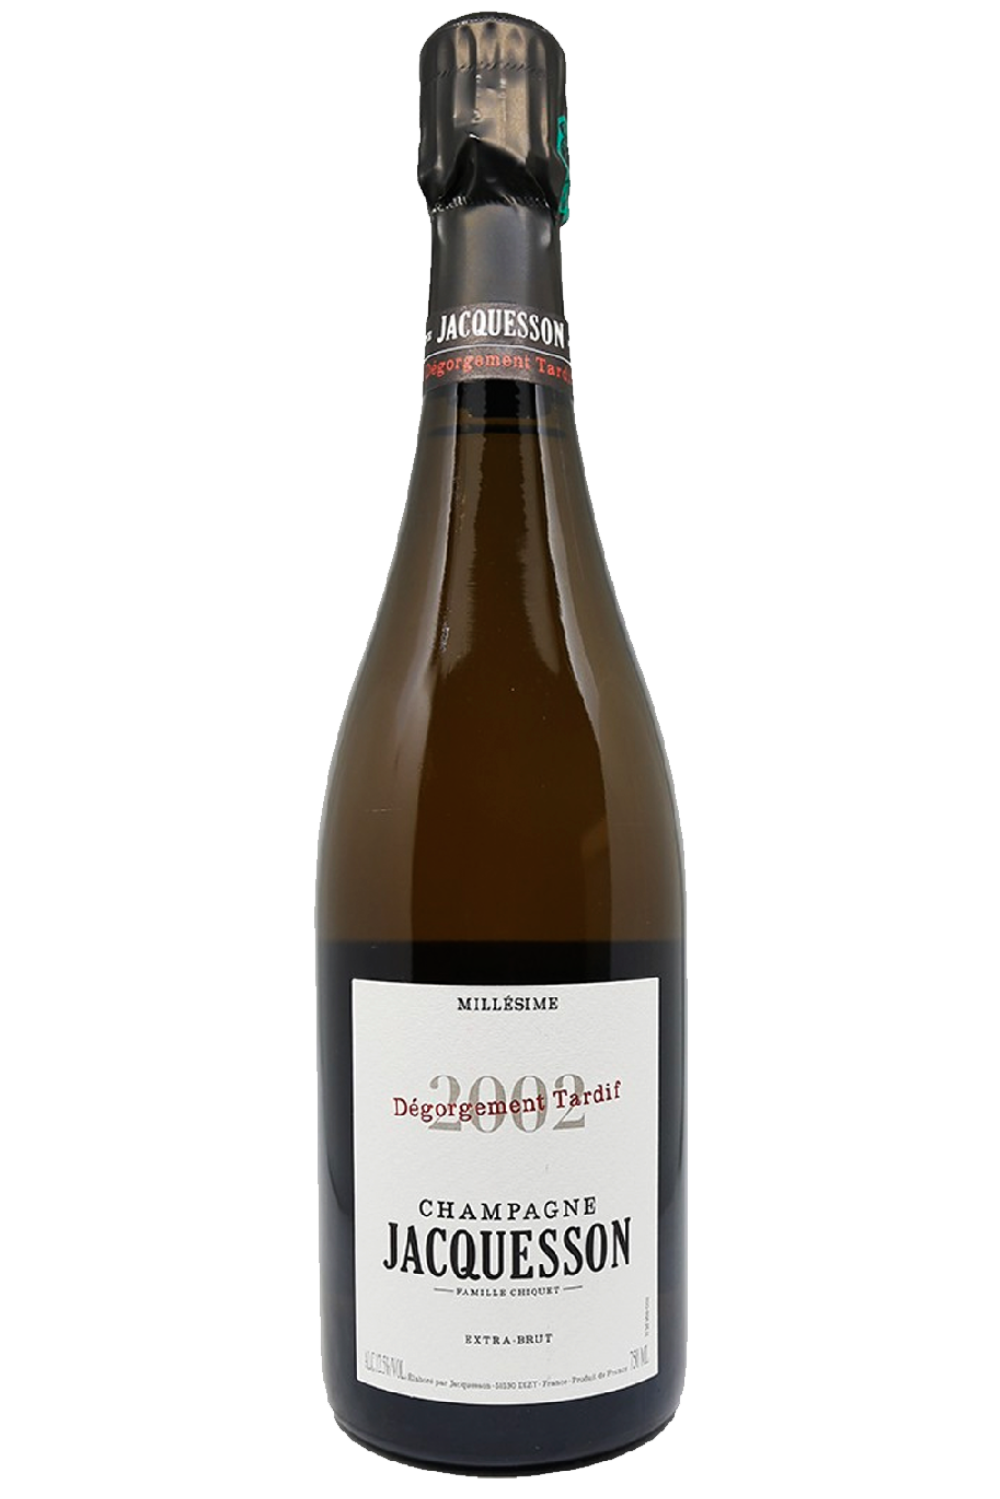 WineVins Champagne Jacquesson Millesime D.T.